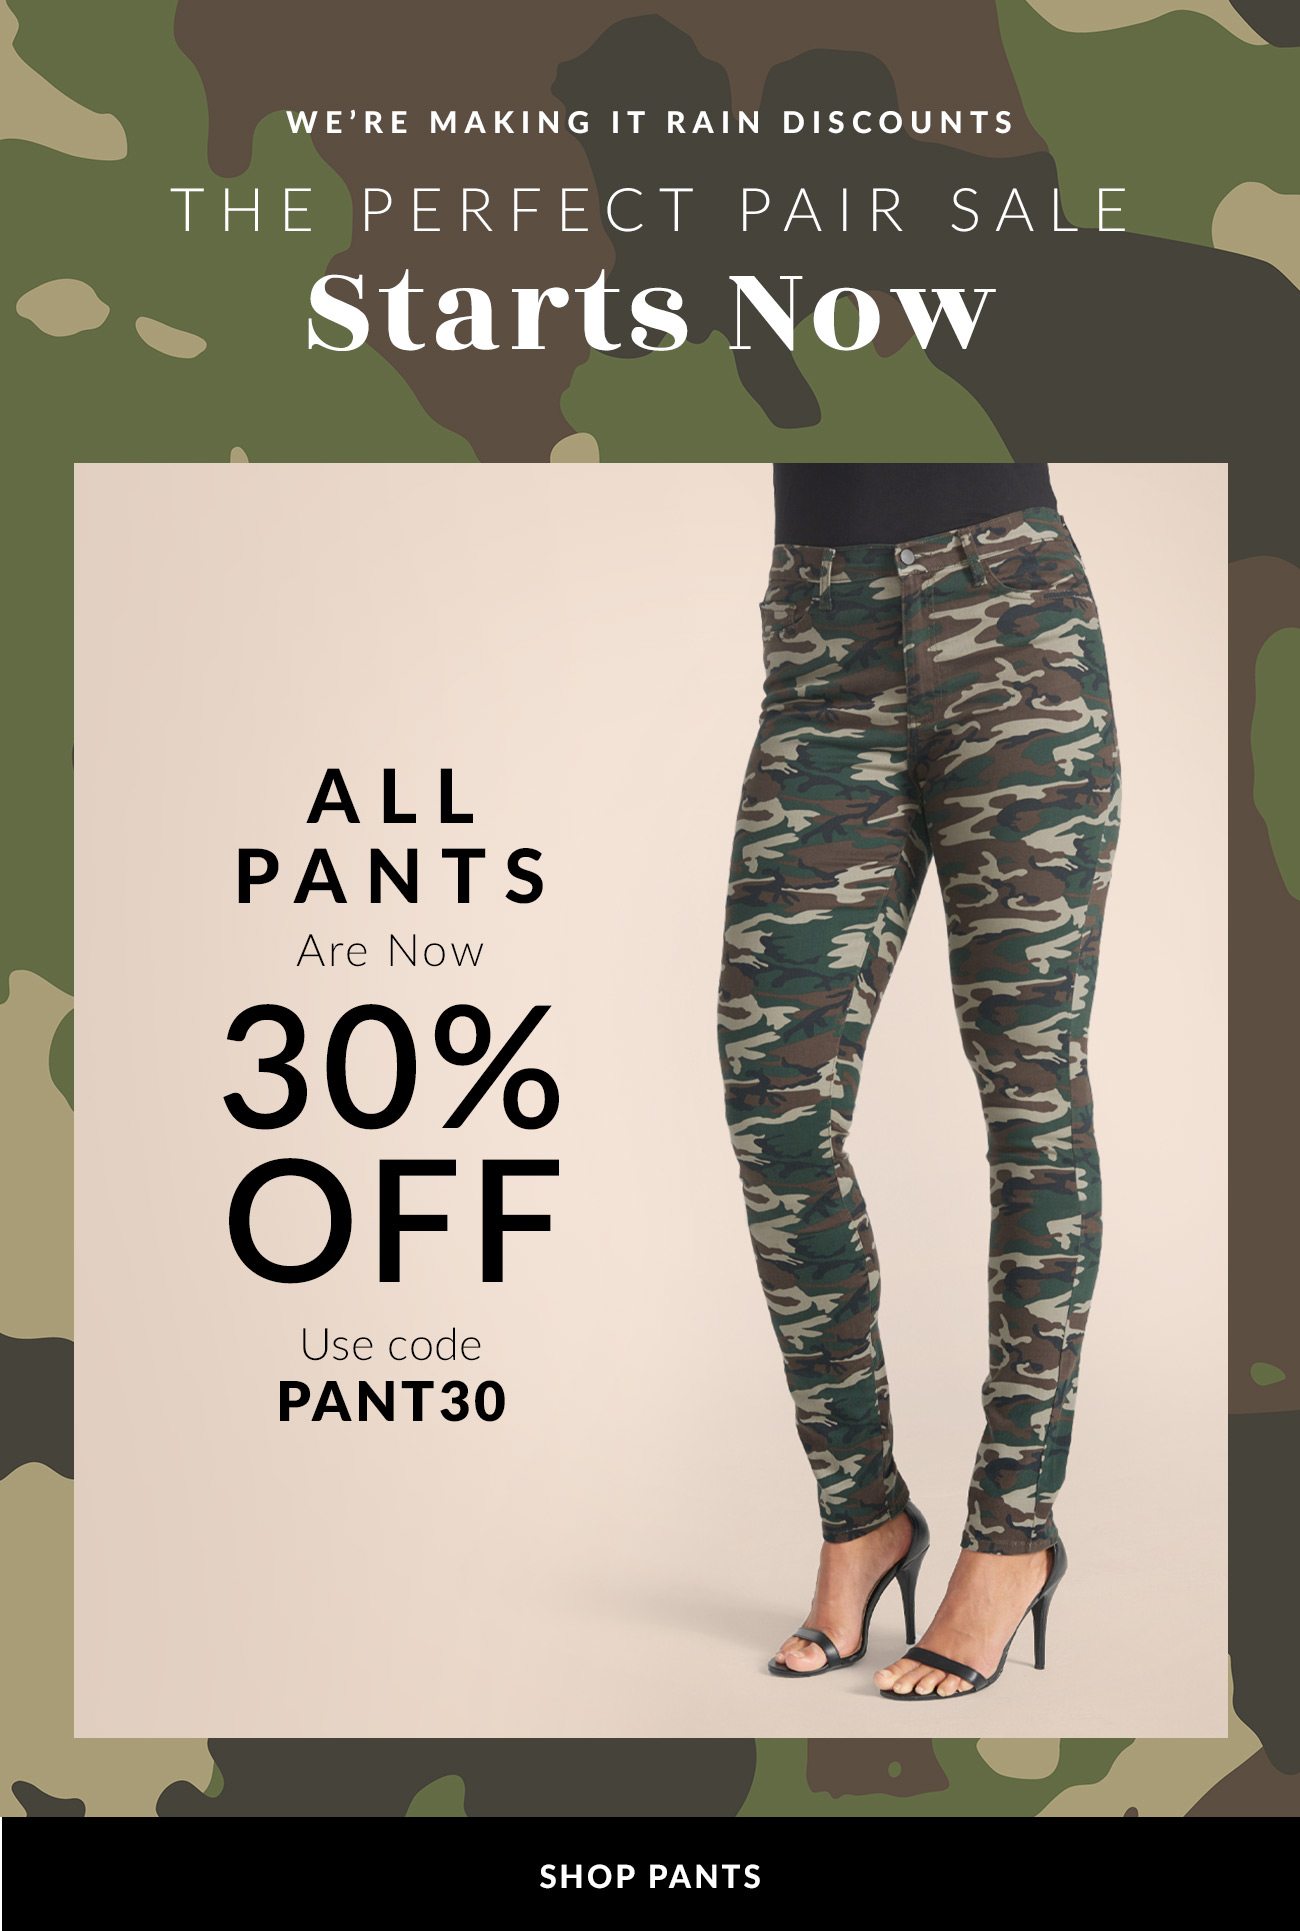 The Perfect Pair Sale Starts Now - All Pants are now 30% OFF - Code: PANT30 - Shop Pants